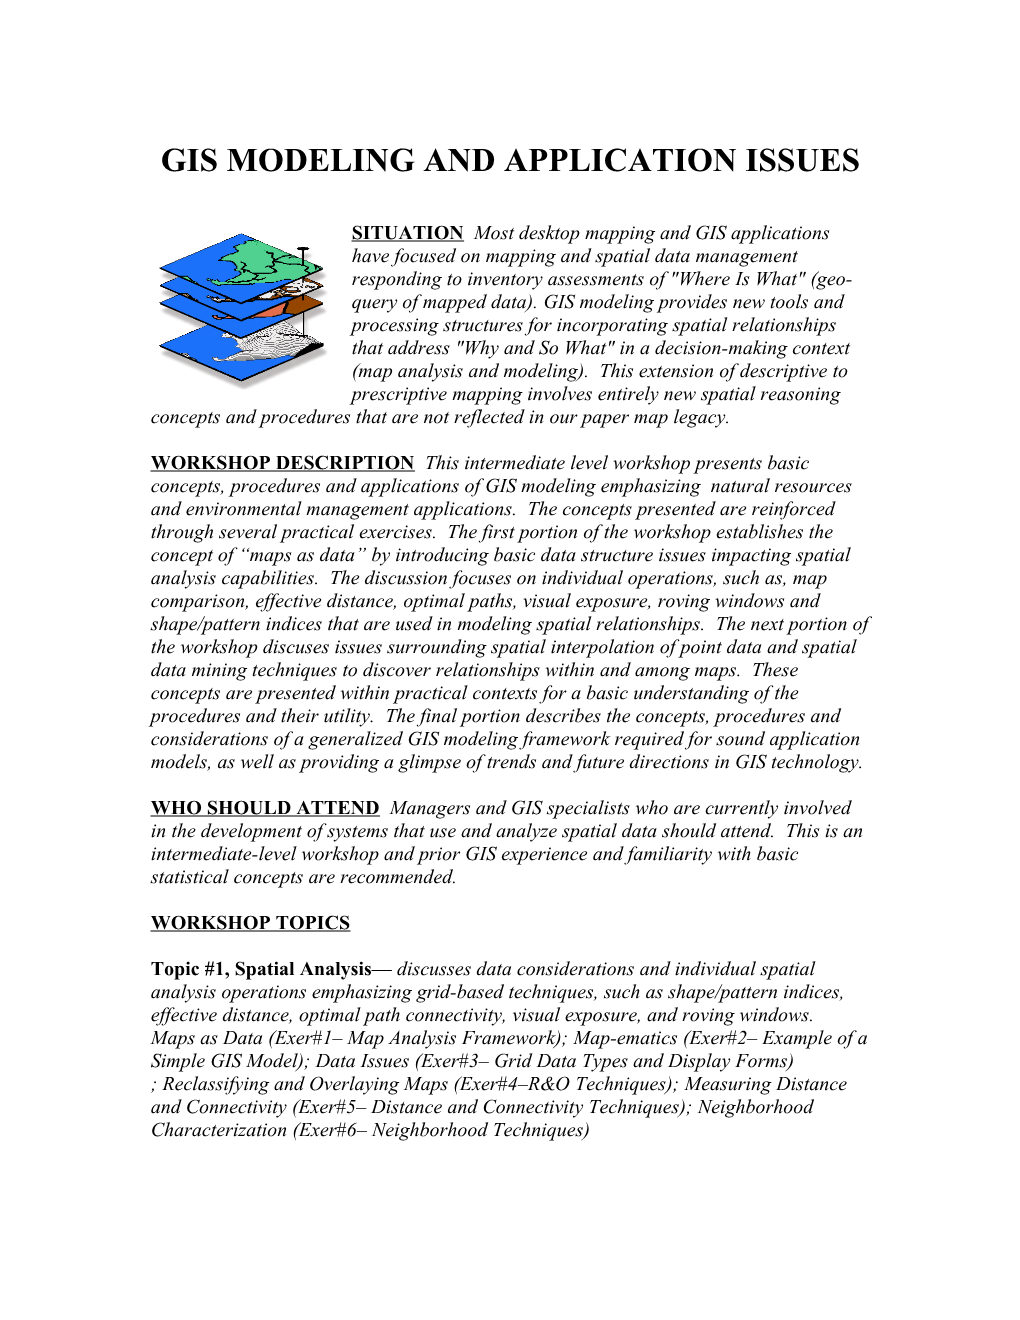 Gis Modeling and Application Issues